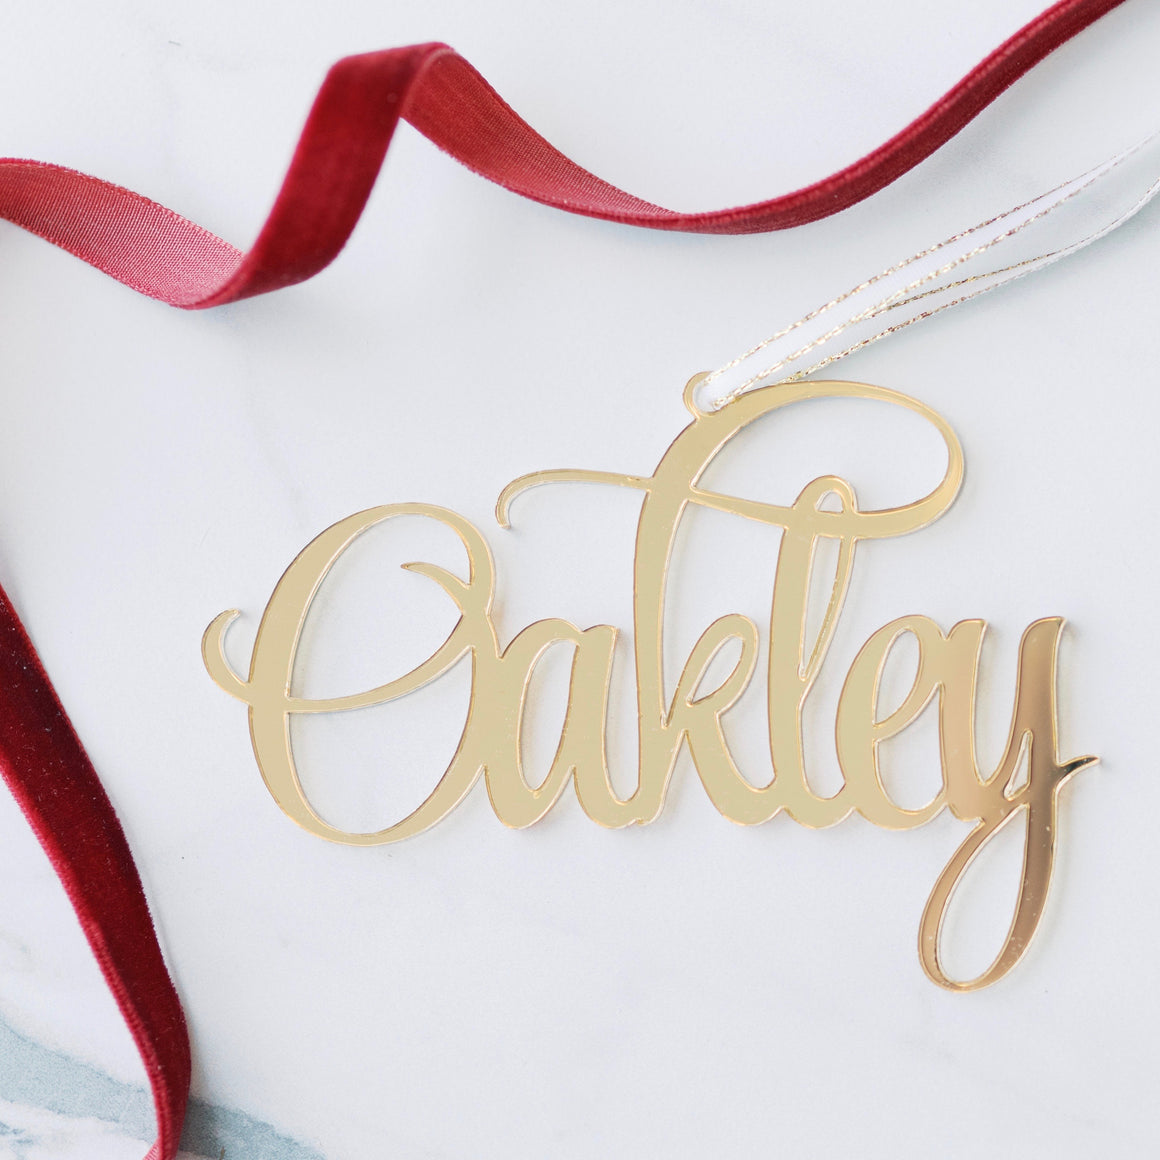 Oakley gold name Christmas ornament with red ribbon around it